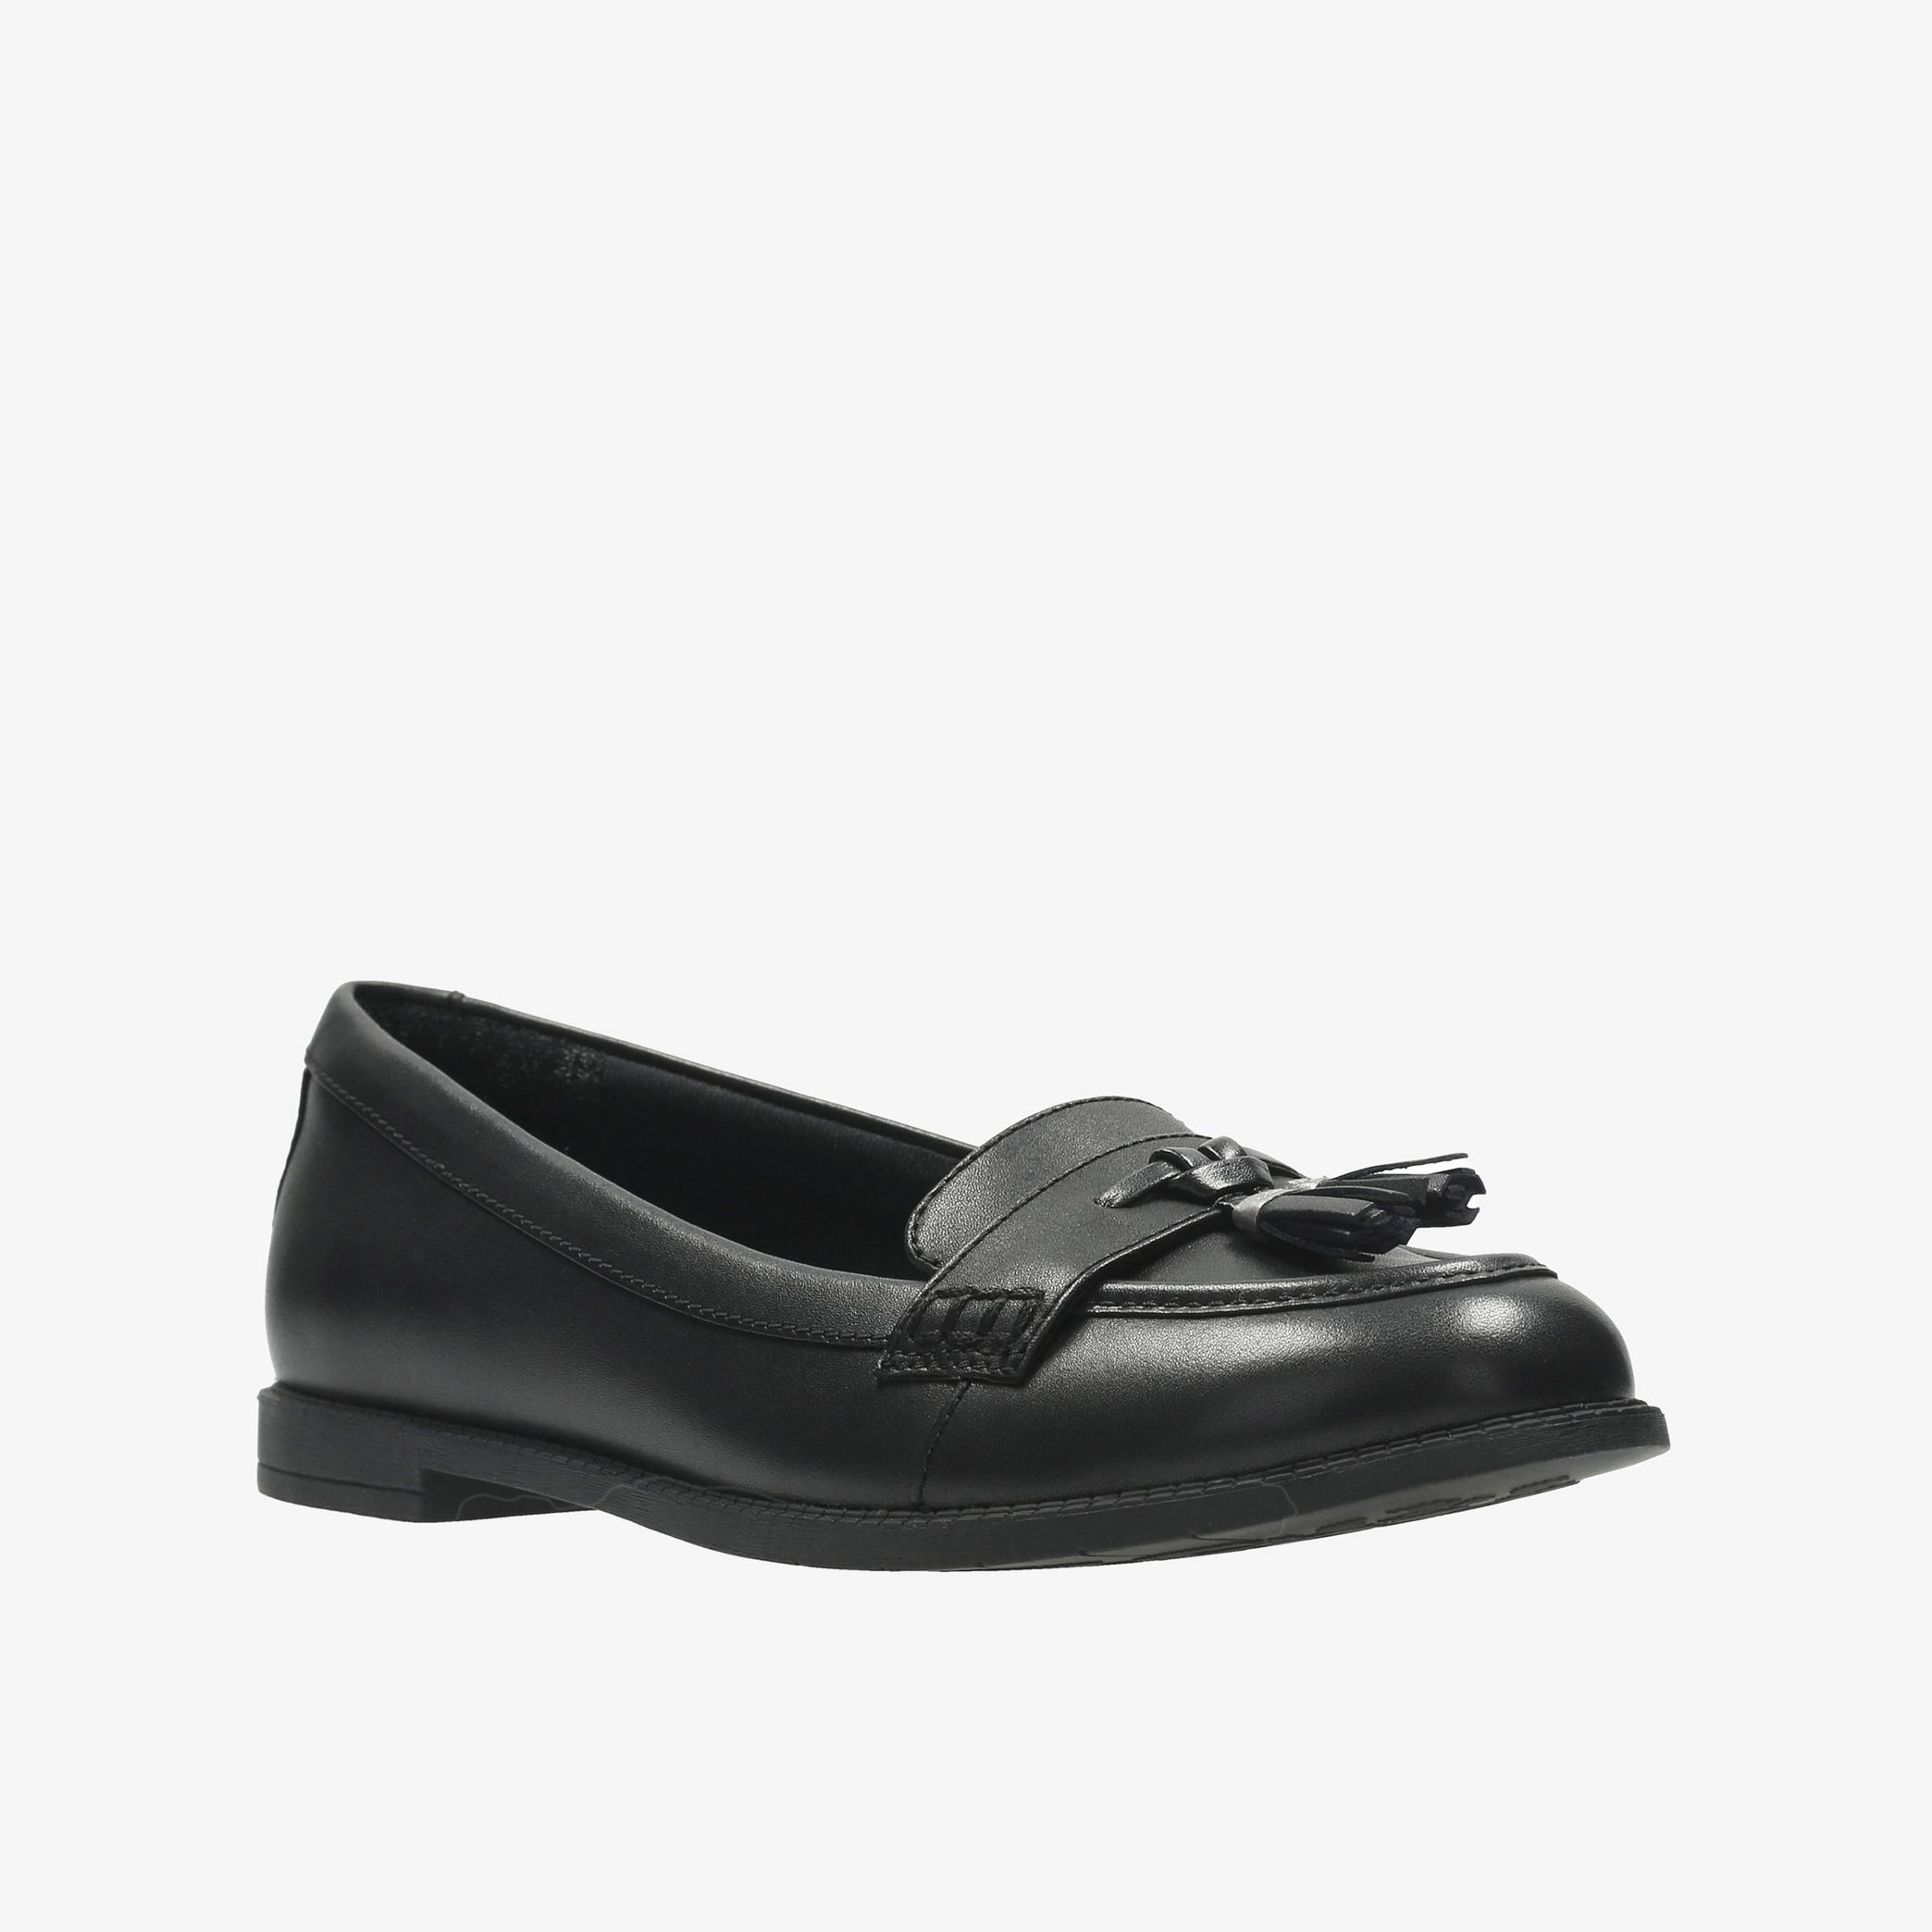 Preppy Edge Youth Black Leather Loafers, view 3 of 6